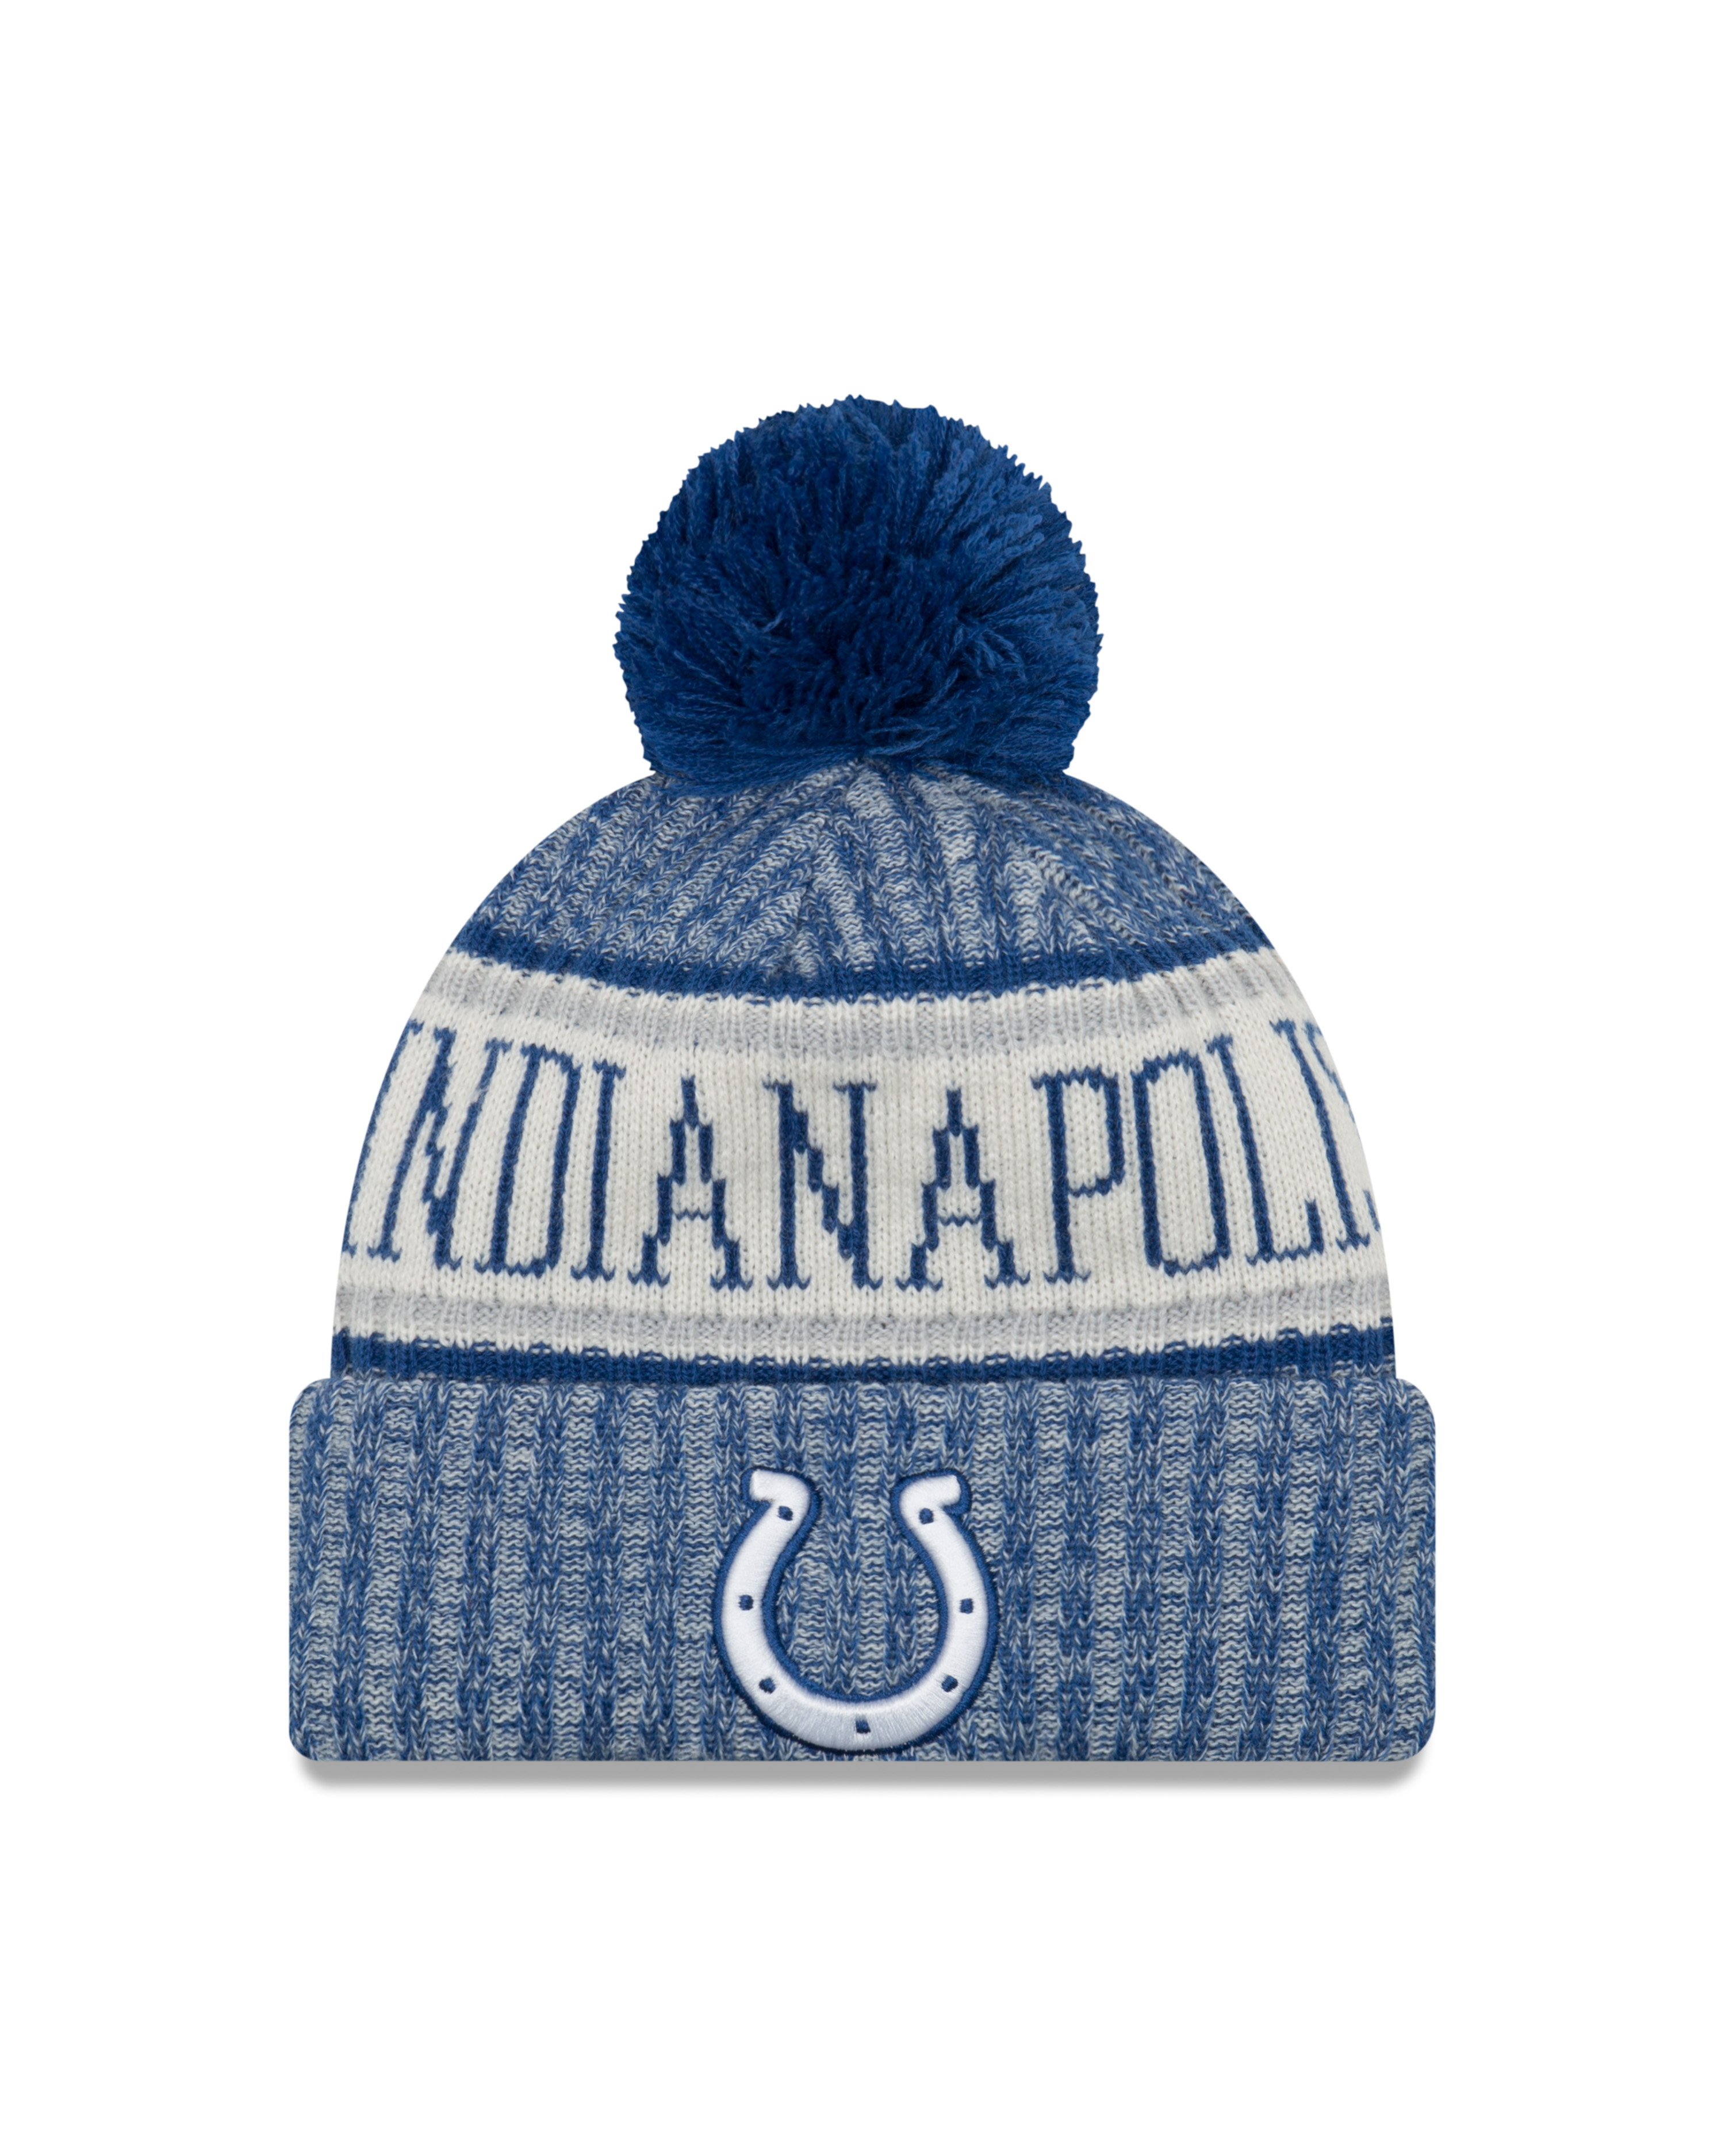 New Era Official NFL Cold Weather Collection #50